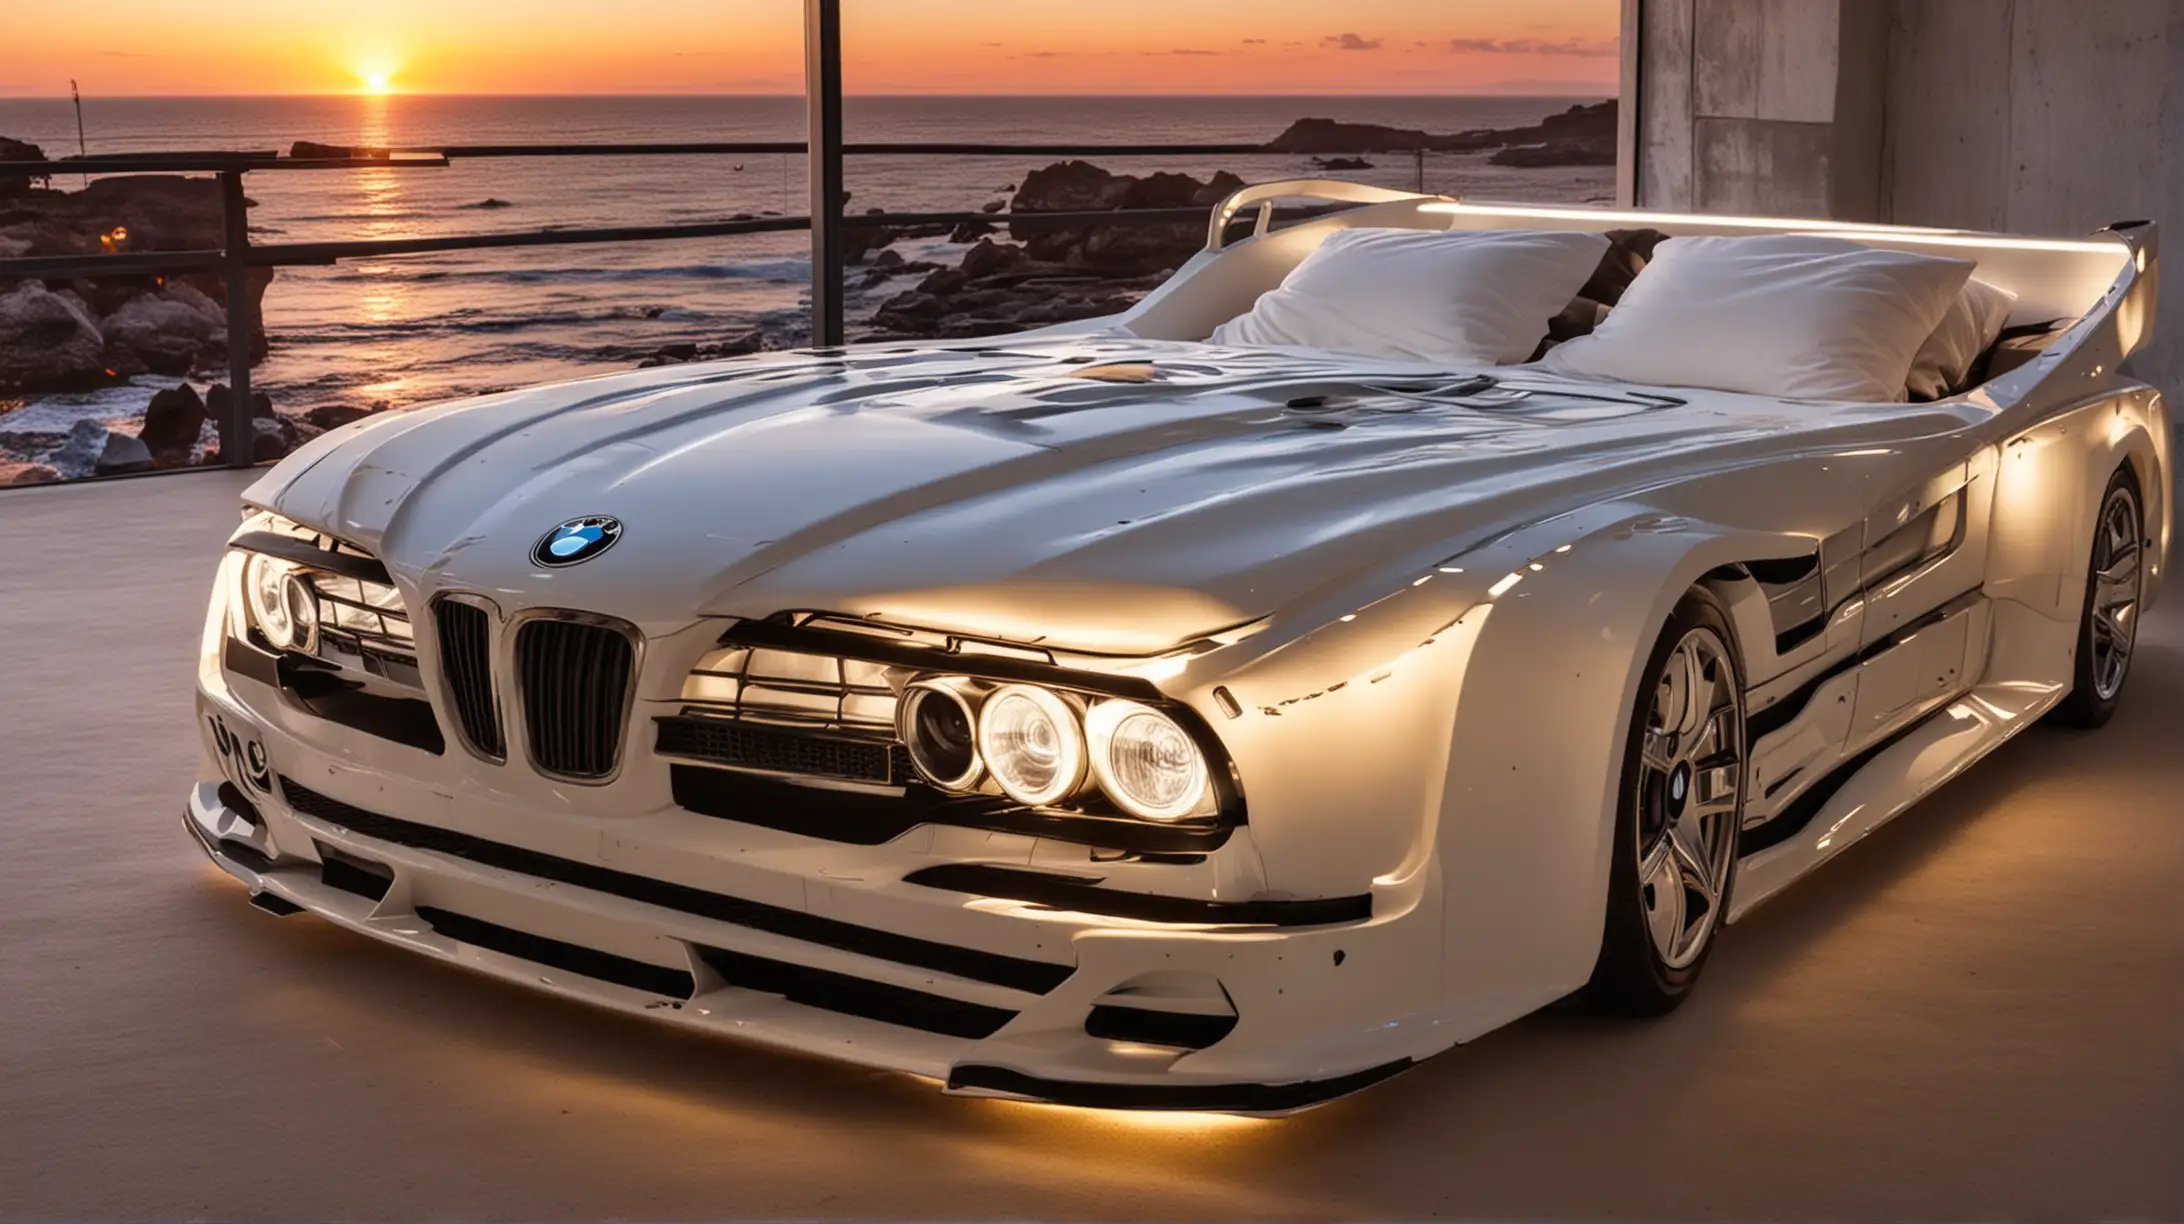 Luxurious BMW Car Shaped Double Bed with Sunset Graphics